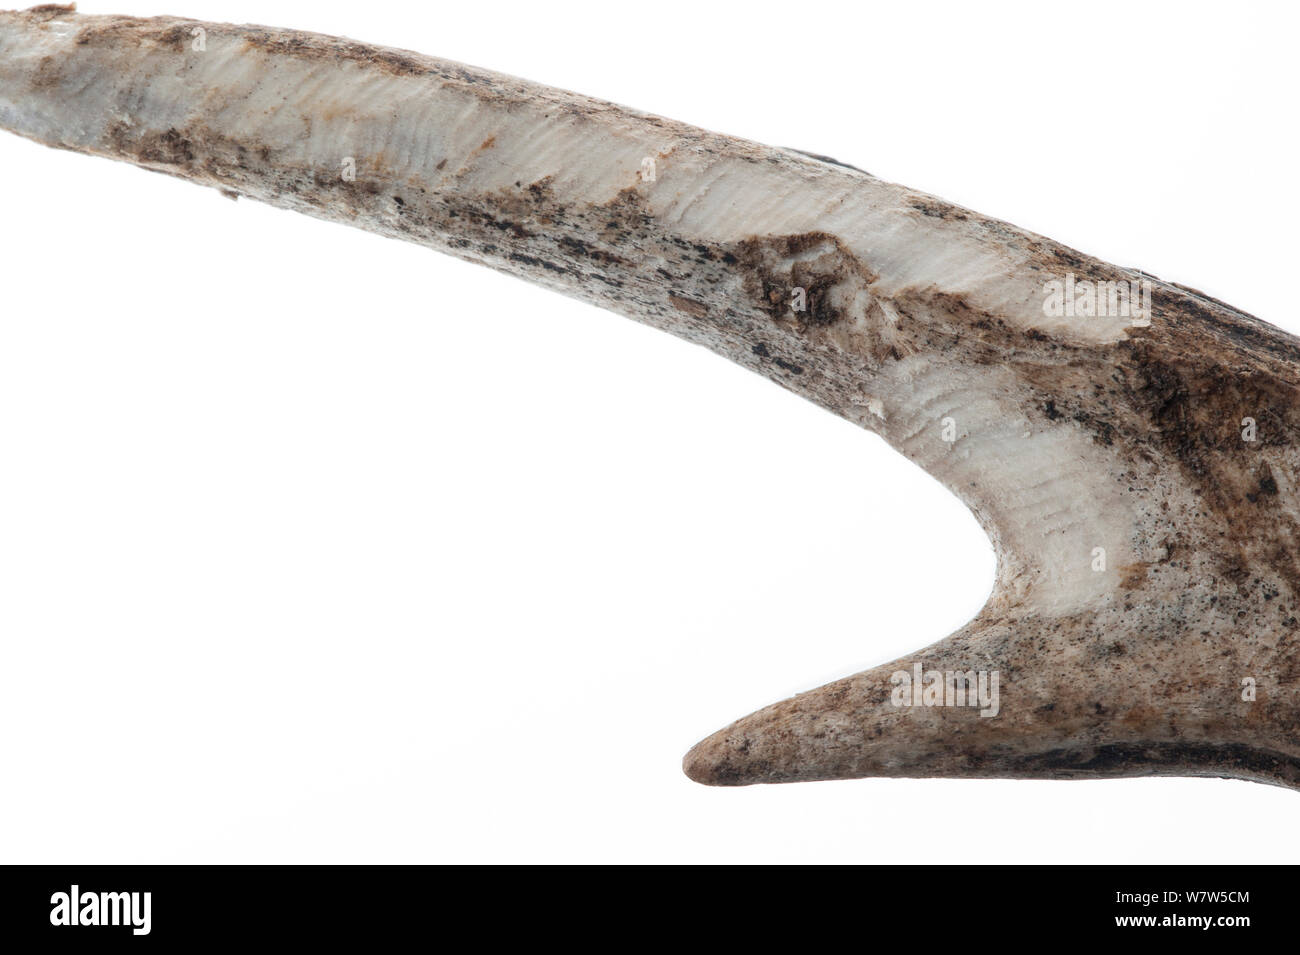 Close-up of the shed antler of a Roe deer (Capreolus capreolus), showing teeth marks where it has been gnawed upon by mice, squirrels and other rodents for Calcium, Magnesium and other minerals, UK Stock Photo